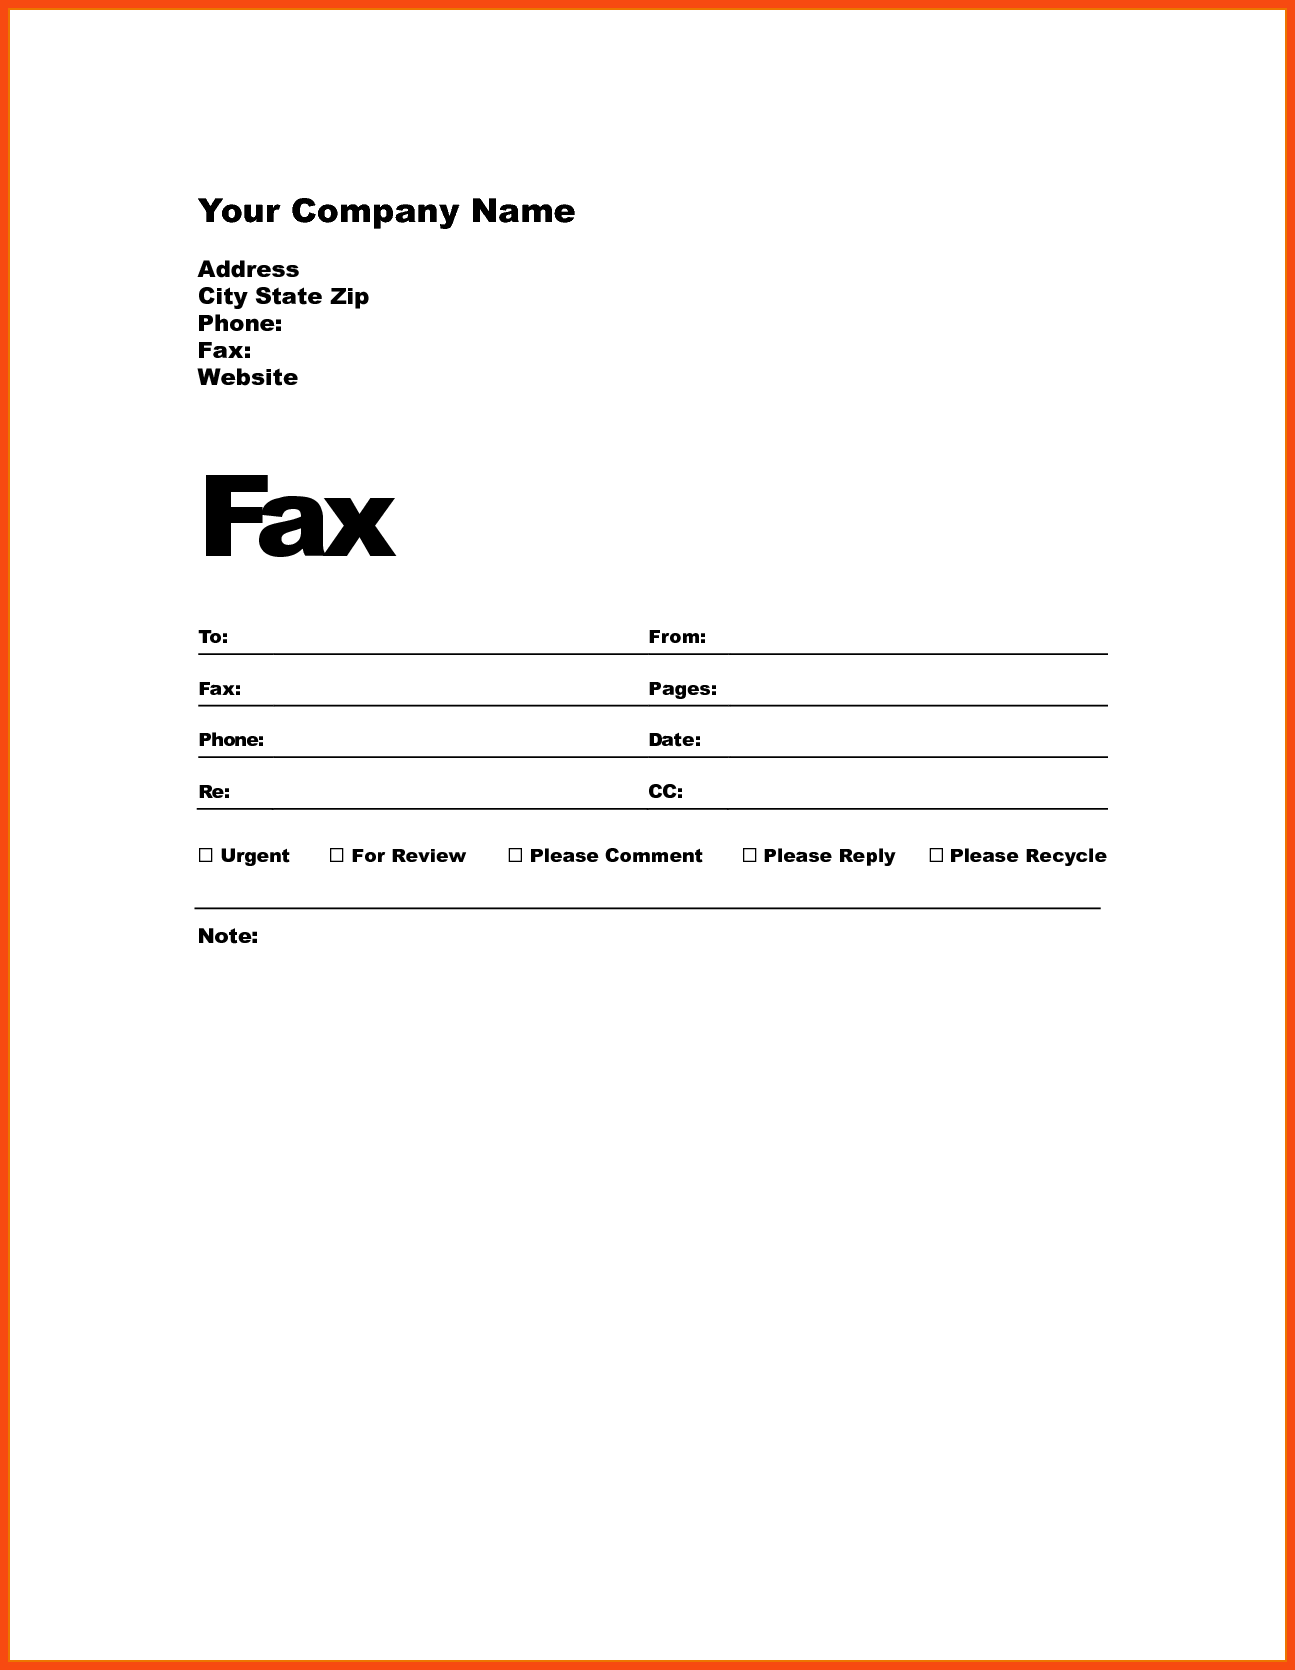 Free Professional Fax Cover Sheet Template In Pdf Free Professional Fax Cover Sheet Template 